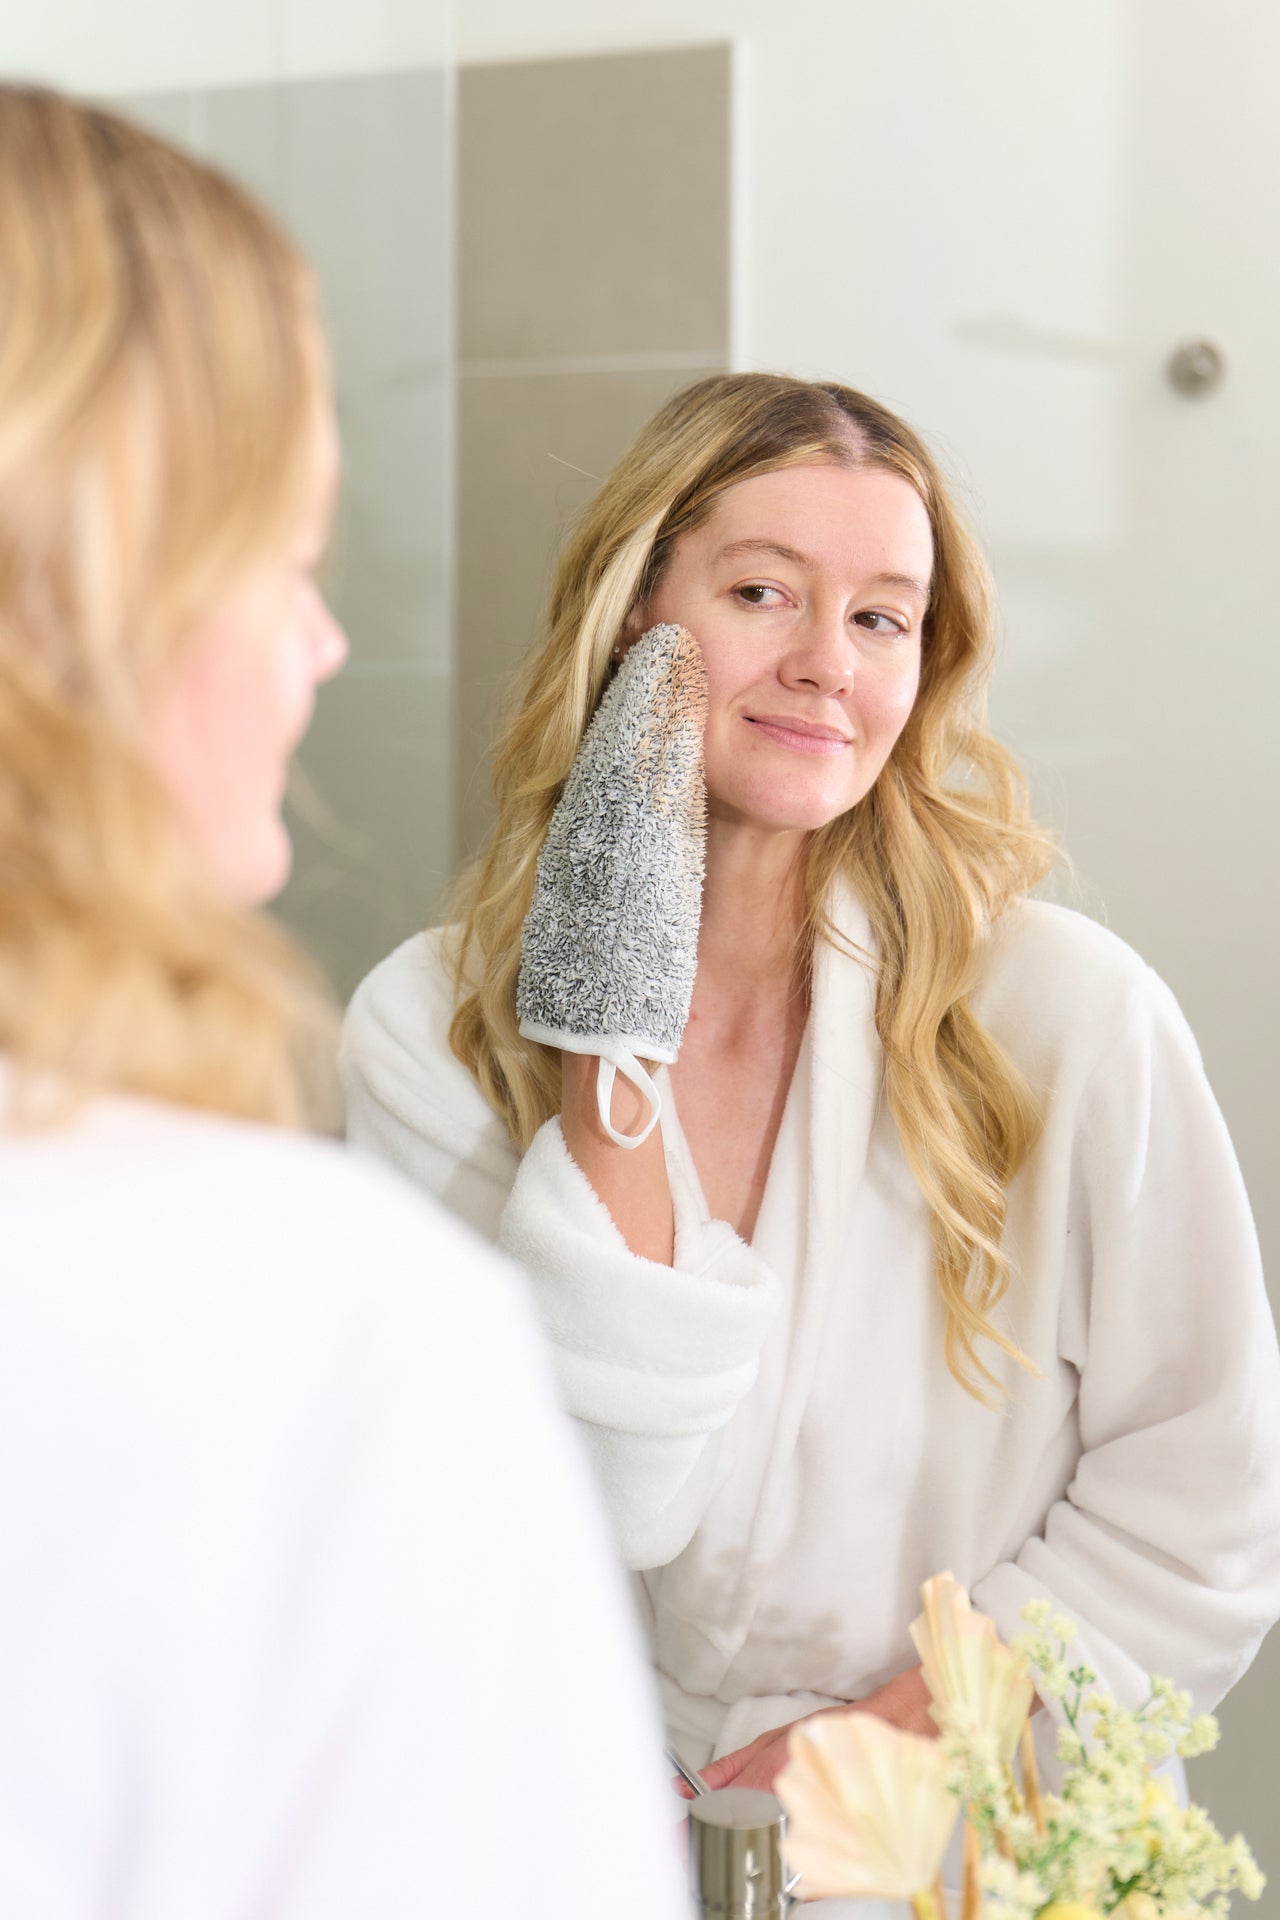 Image of a woman effortlessly removing makeup with the Suzi Kozmetika makeup remover glove, showcasing its ease of use and effectiveness.